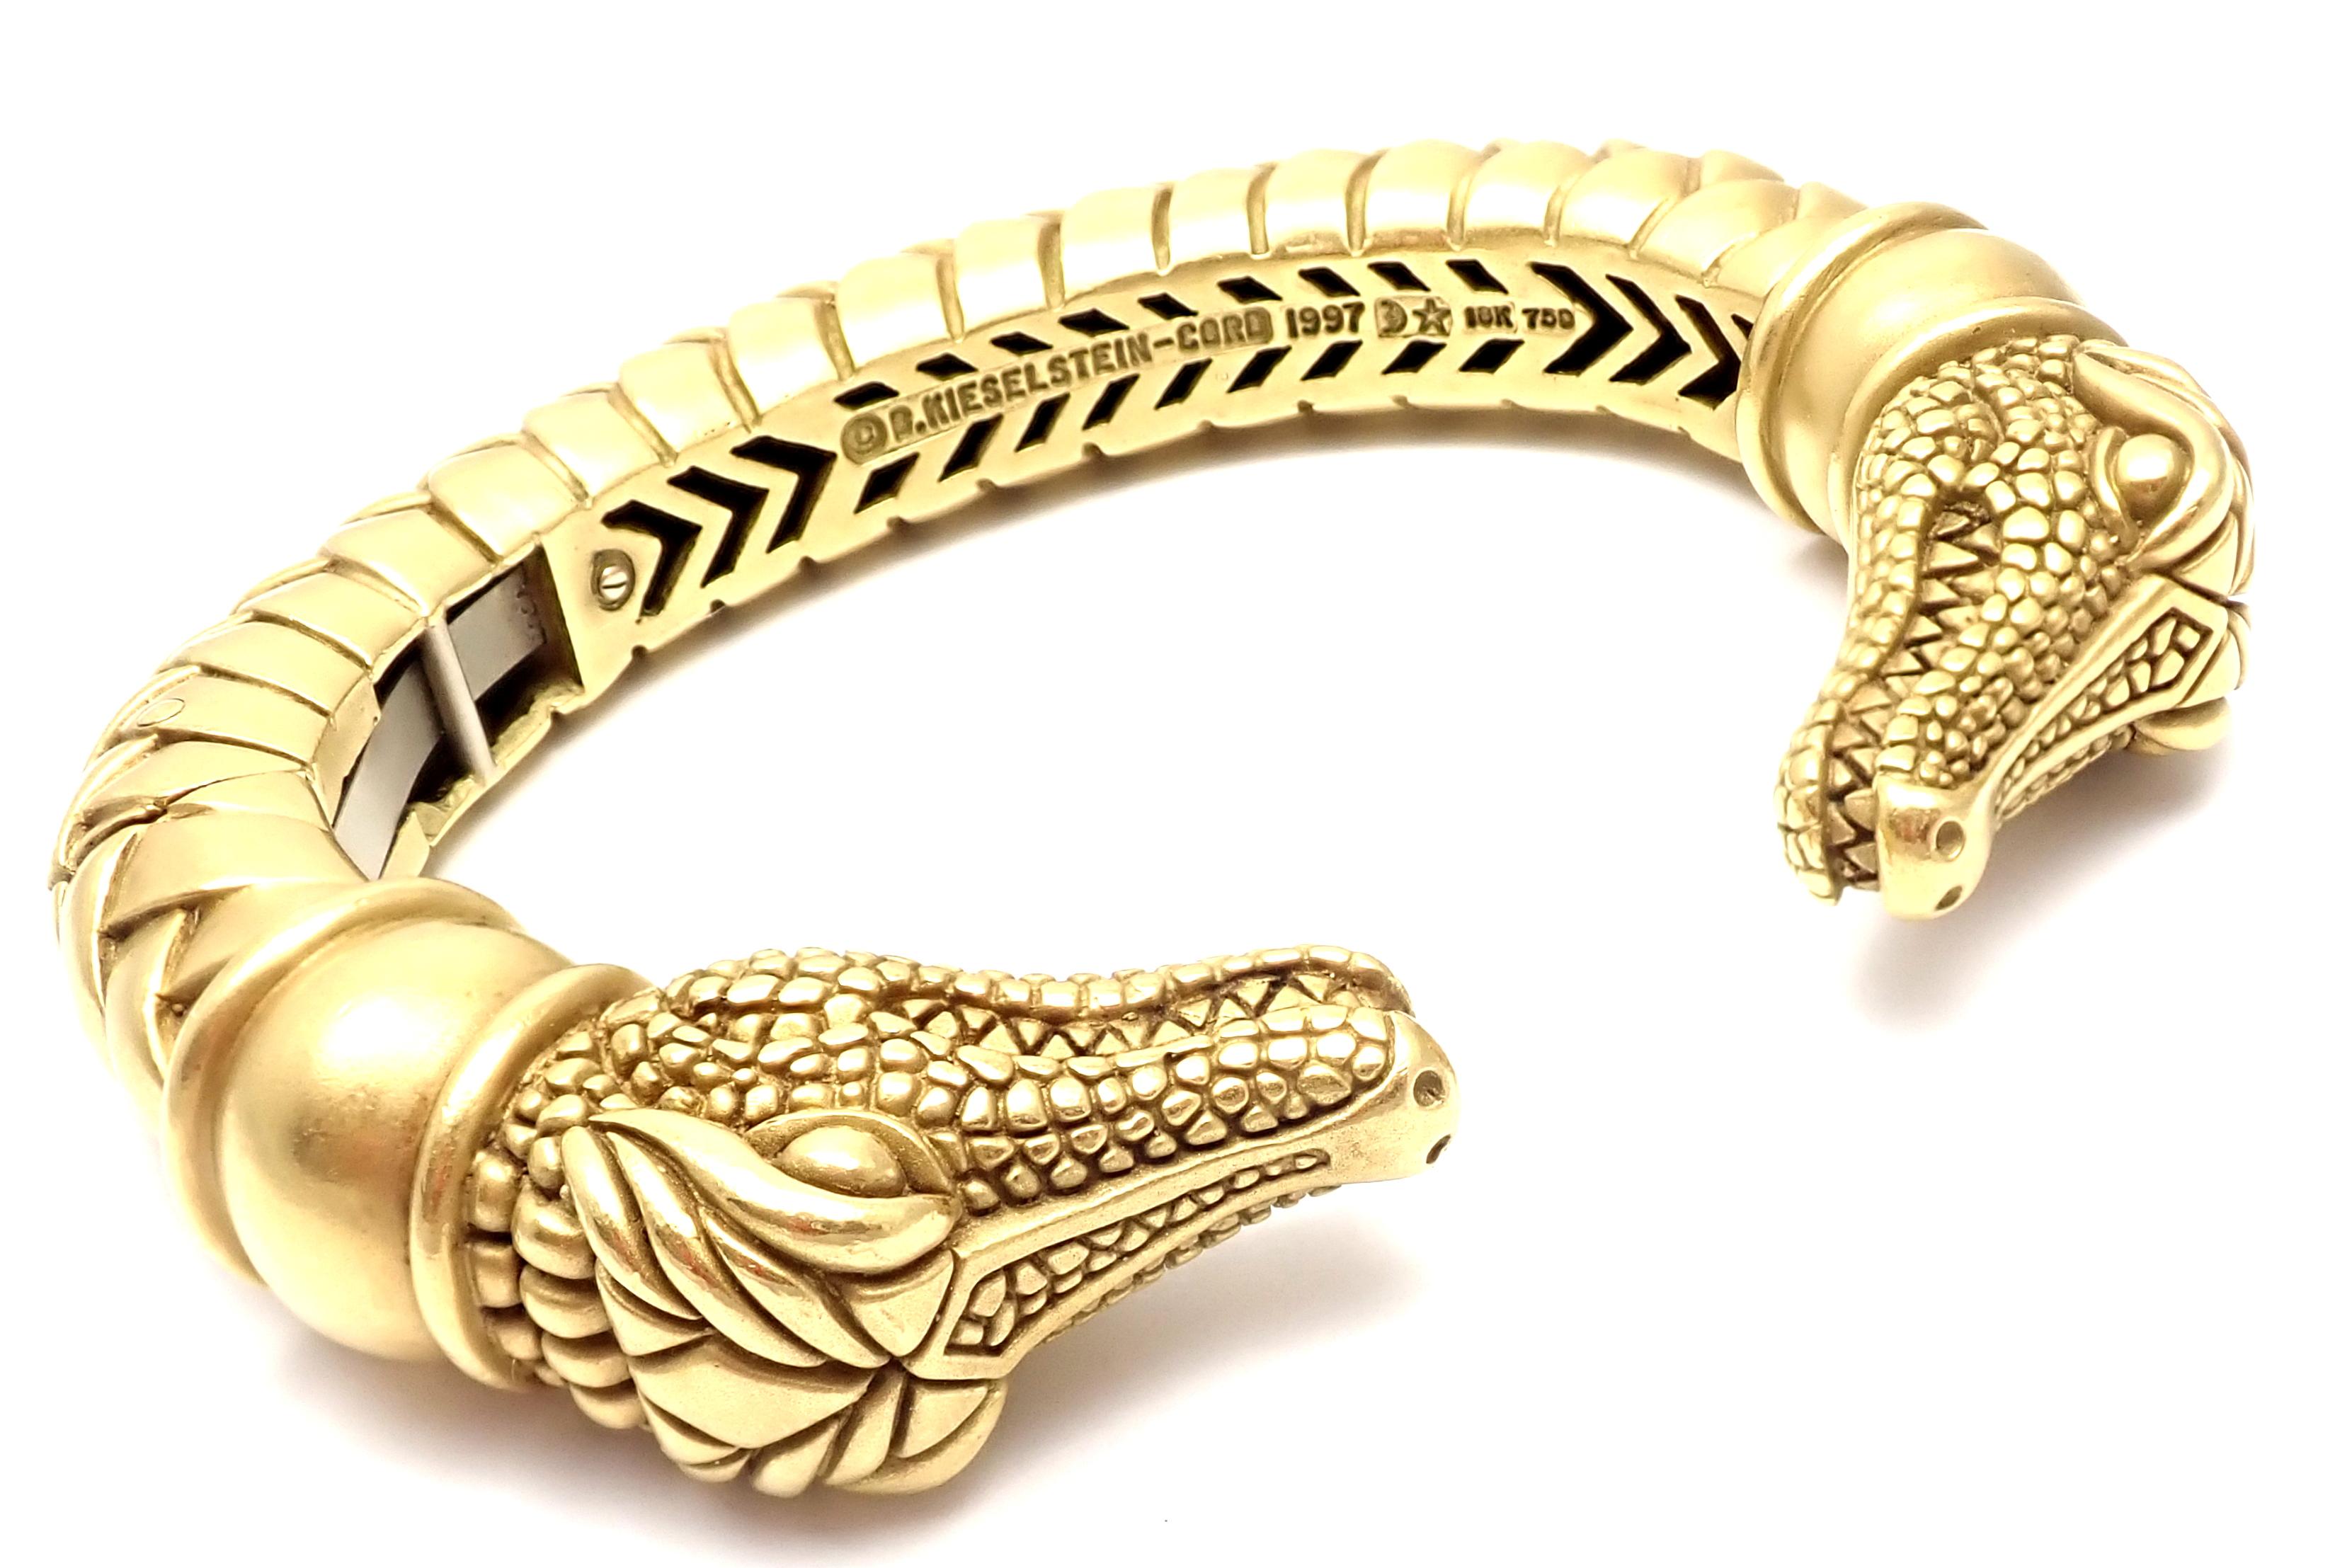 18k Yellow Gold Two Alligator Heads Cuff Bangle Bracelet by Barry Kieselstein Cord.
Details: 
Weight: 141.2 grams
Length: 7.5